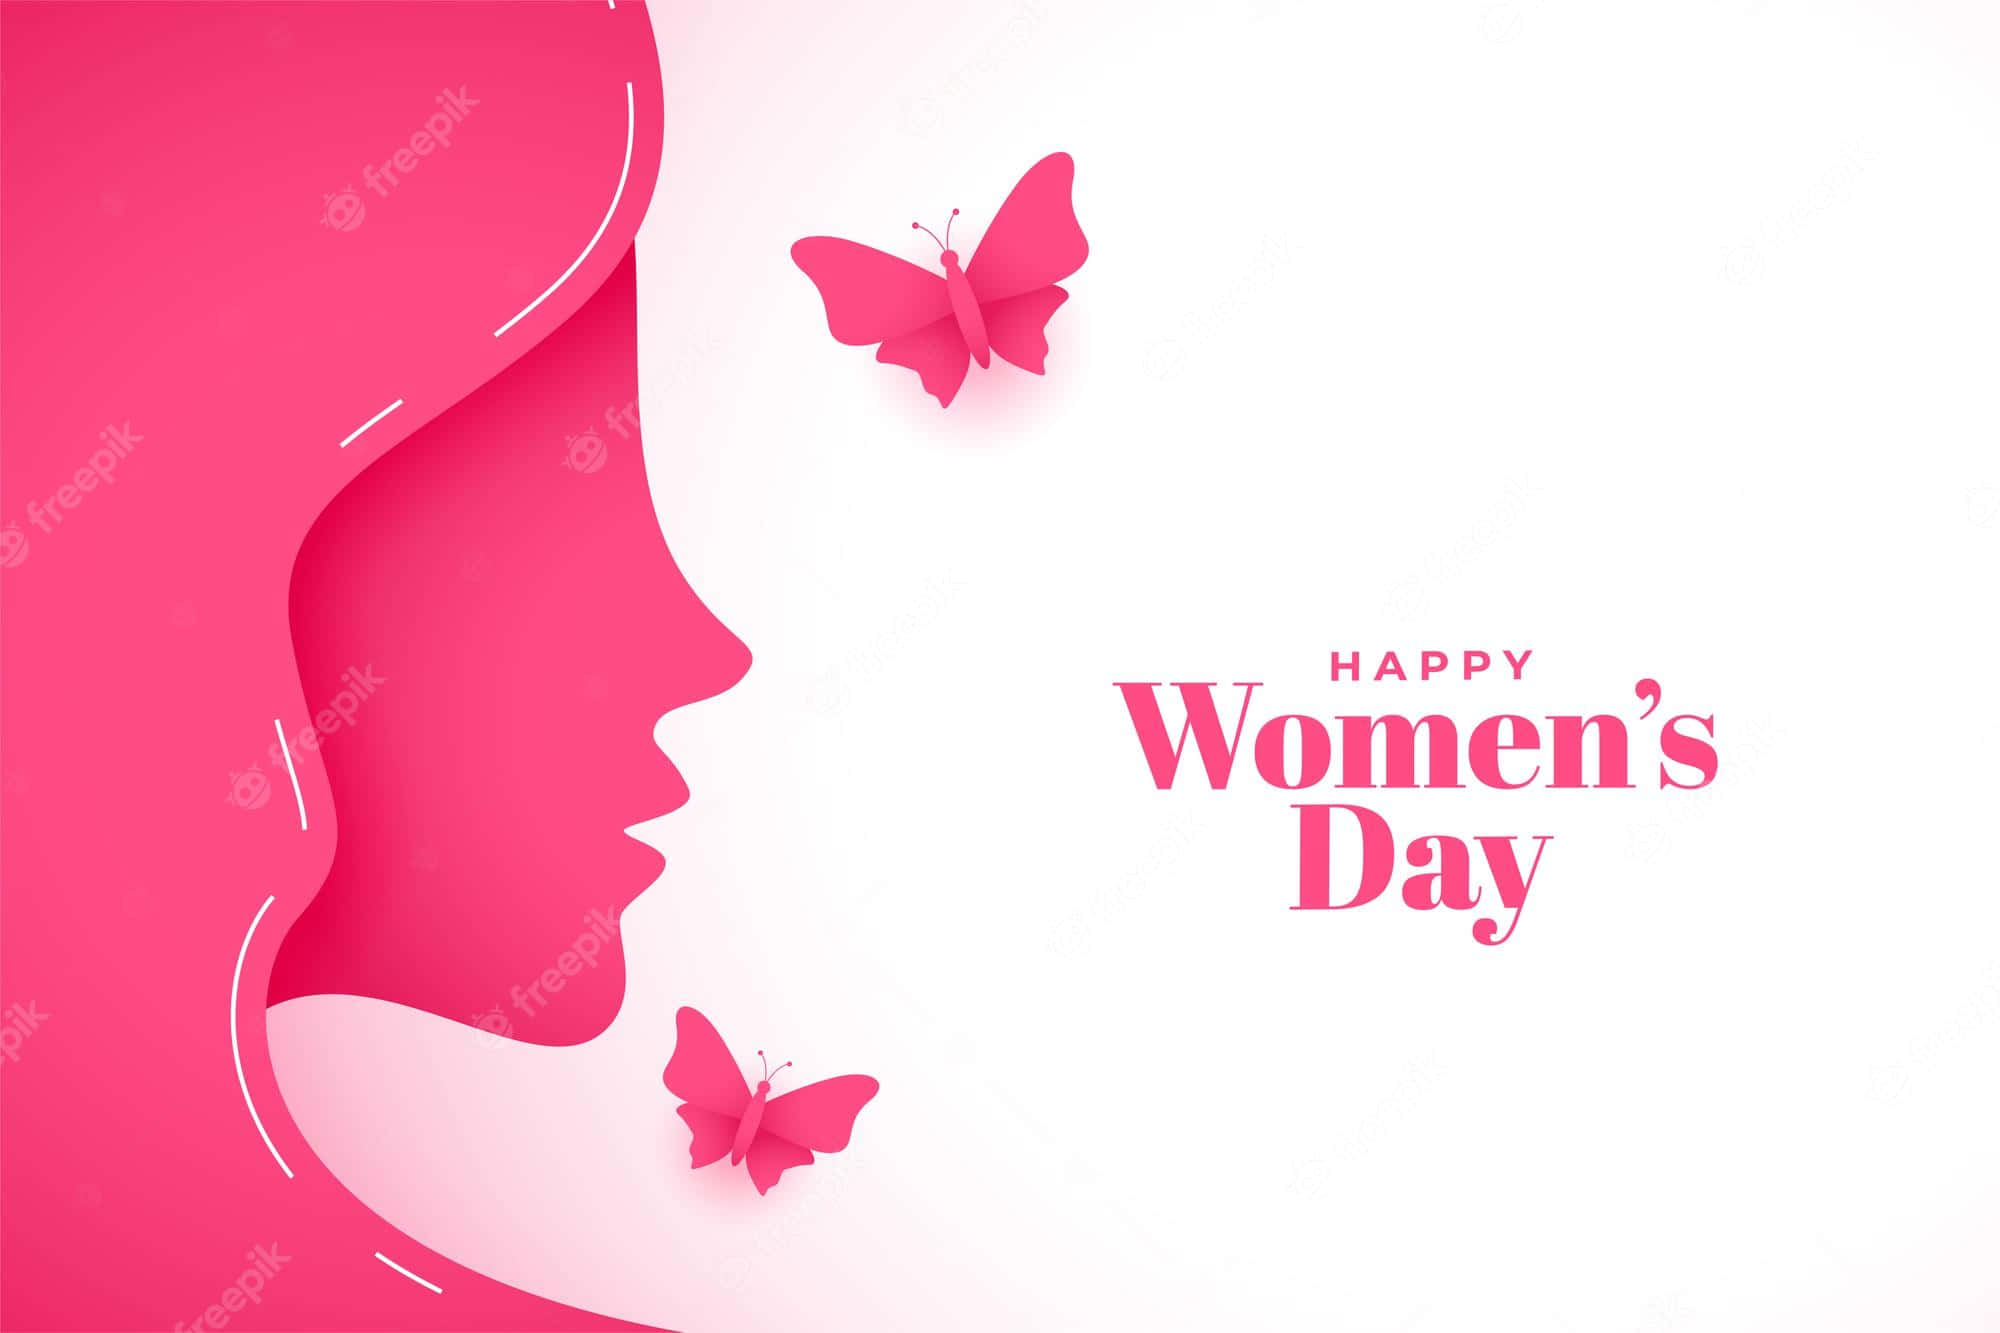 Happy Women's Day Background With A Woman's Face And Butterflies